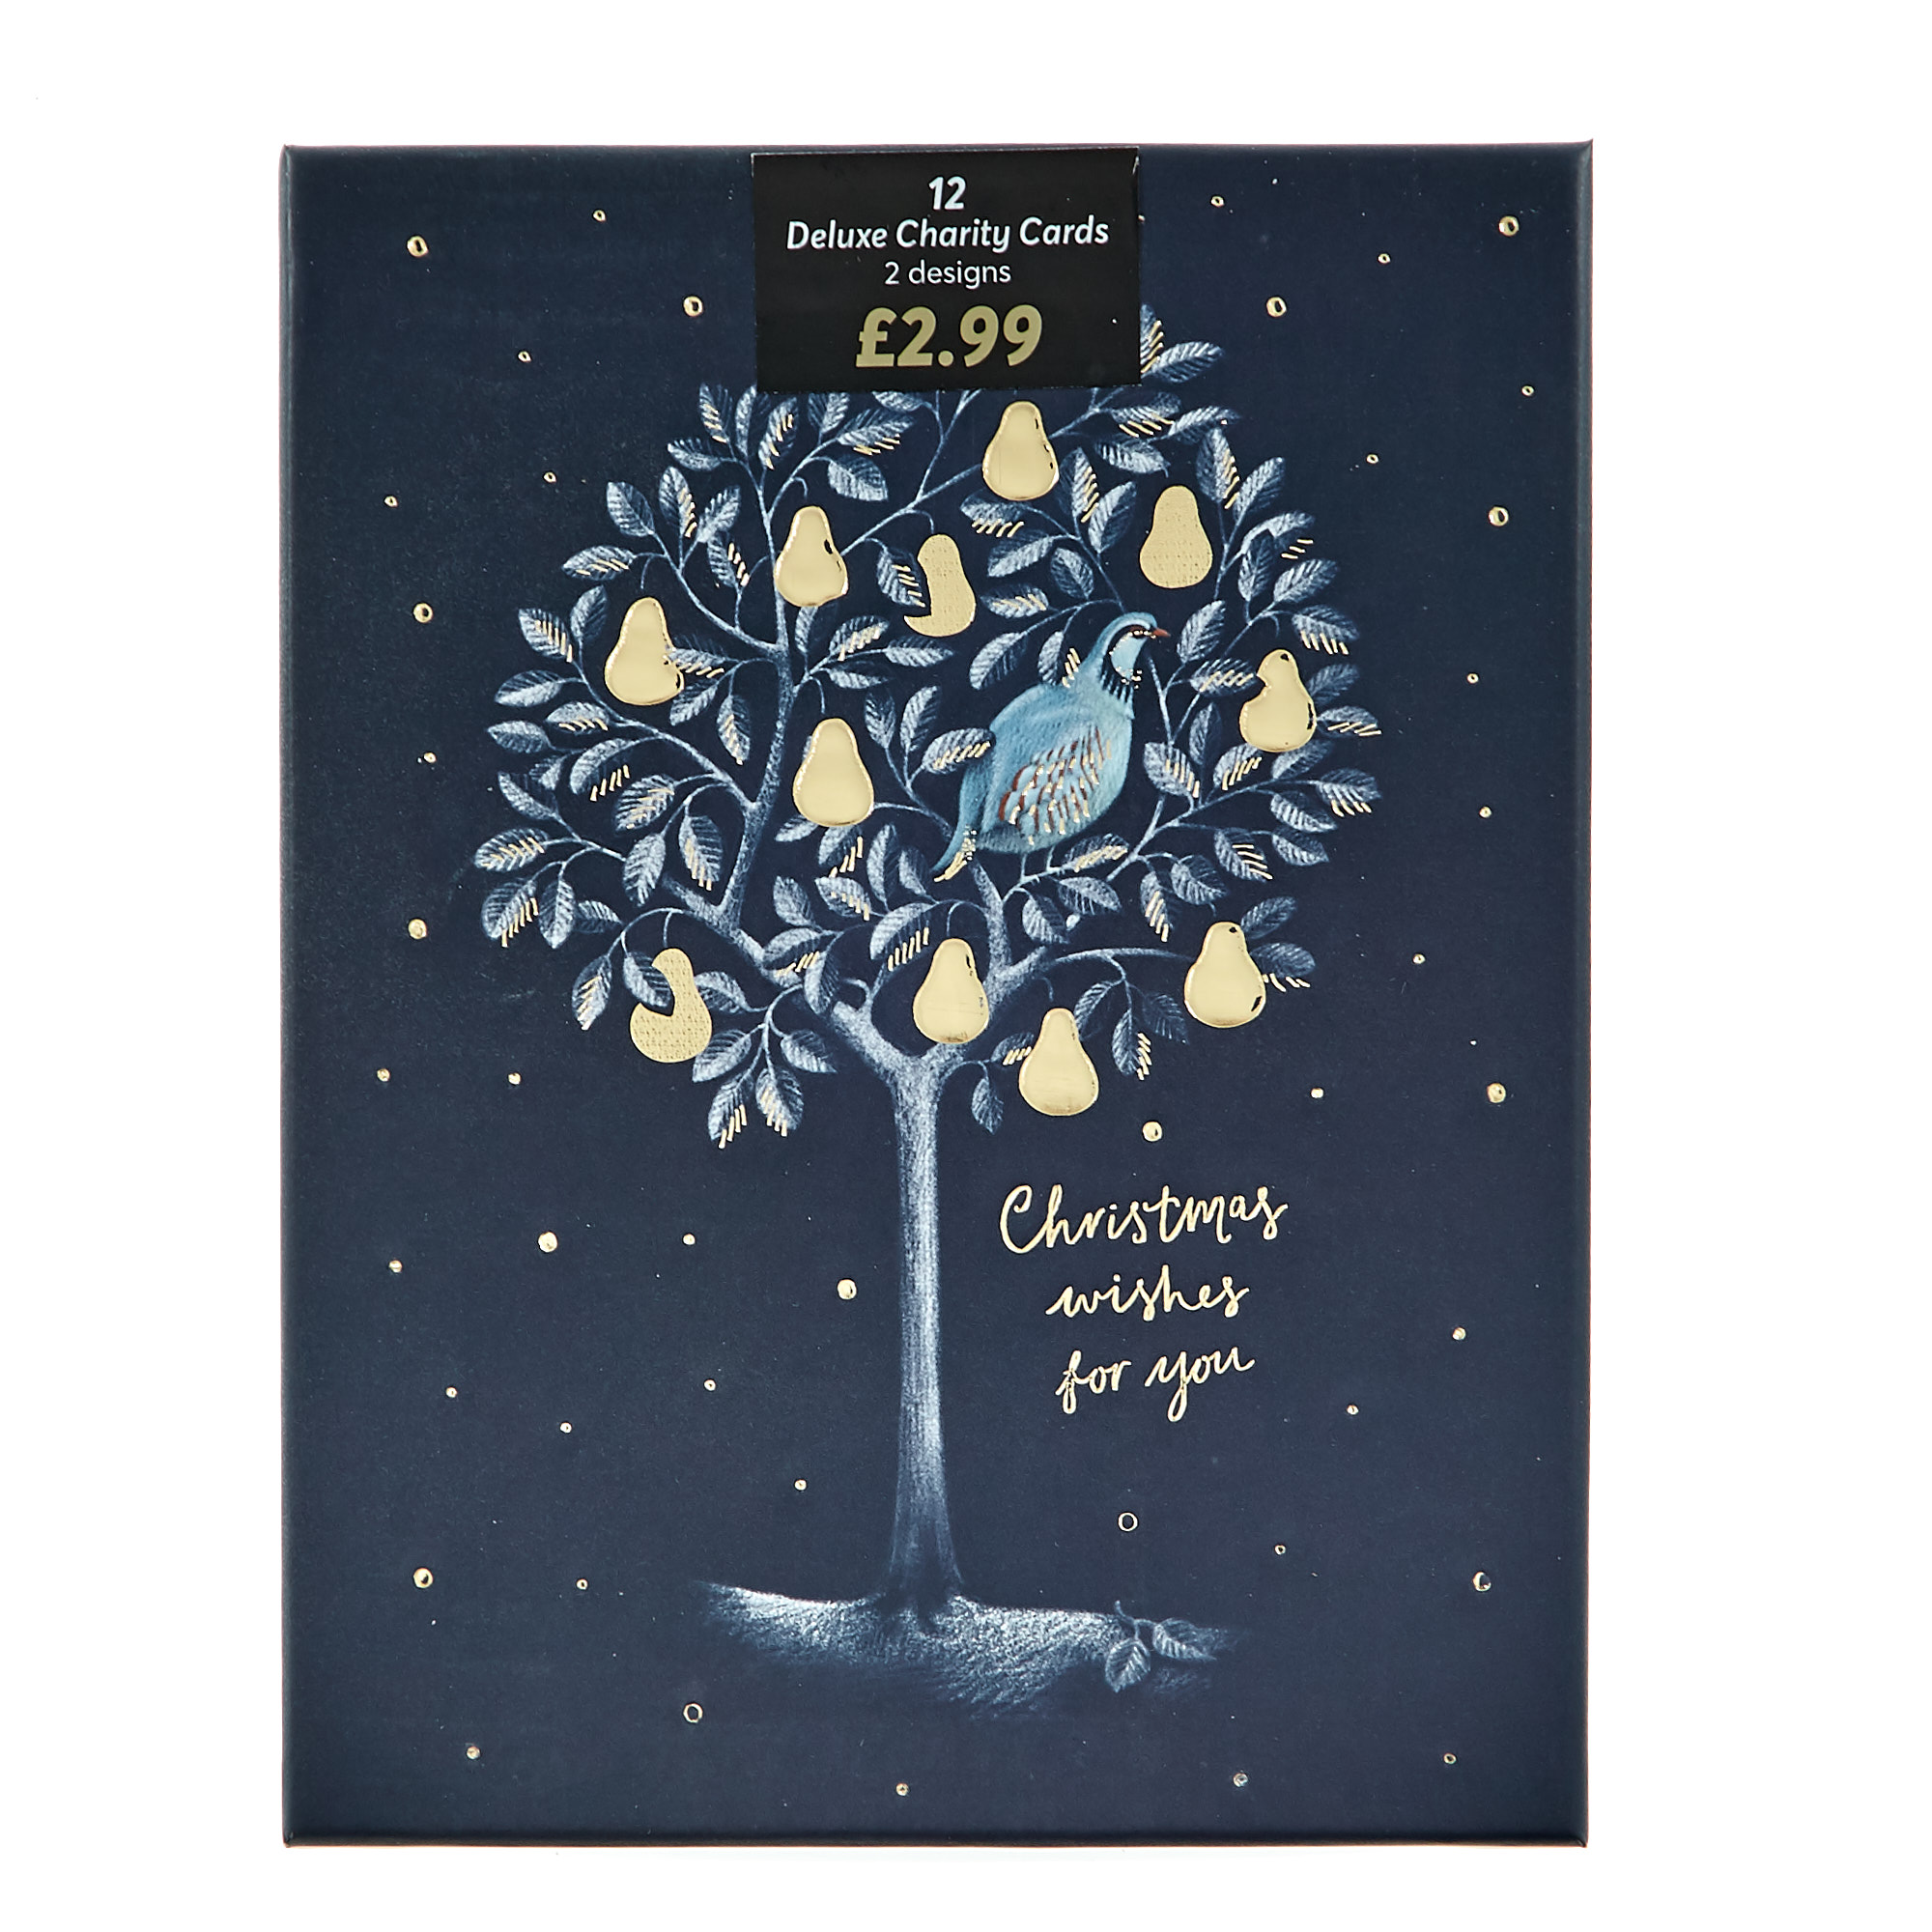 Buy Box of 12 Deluxe Pear Tree Charity Christmas Cards - 2 Designs for GBP 2.99 | Card Factory UK